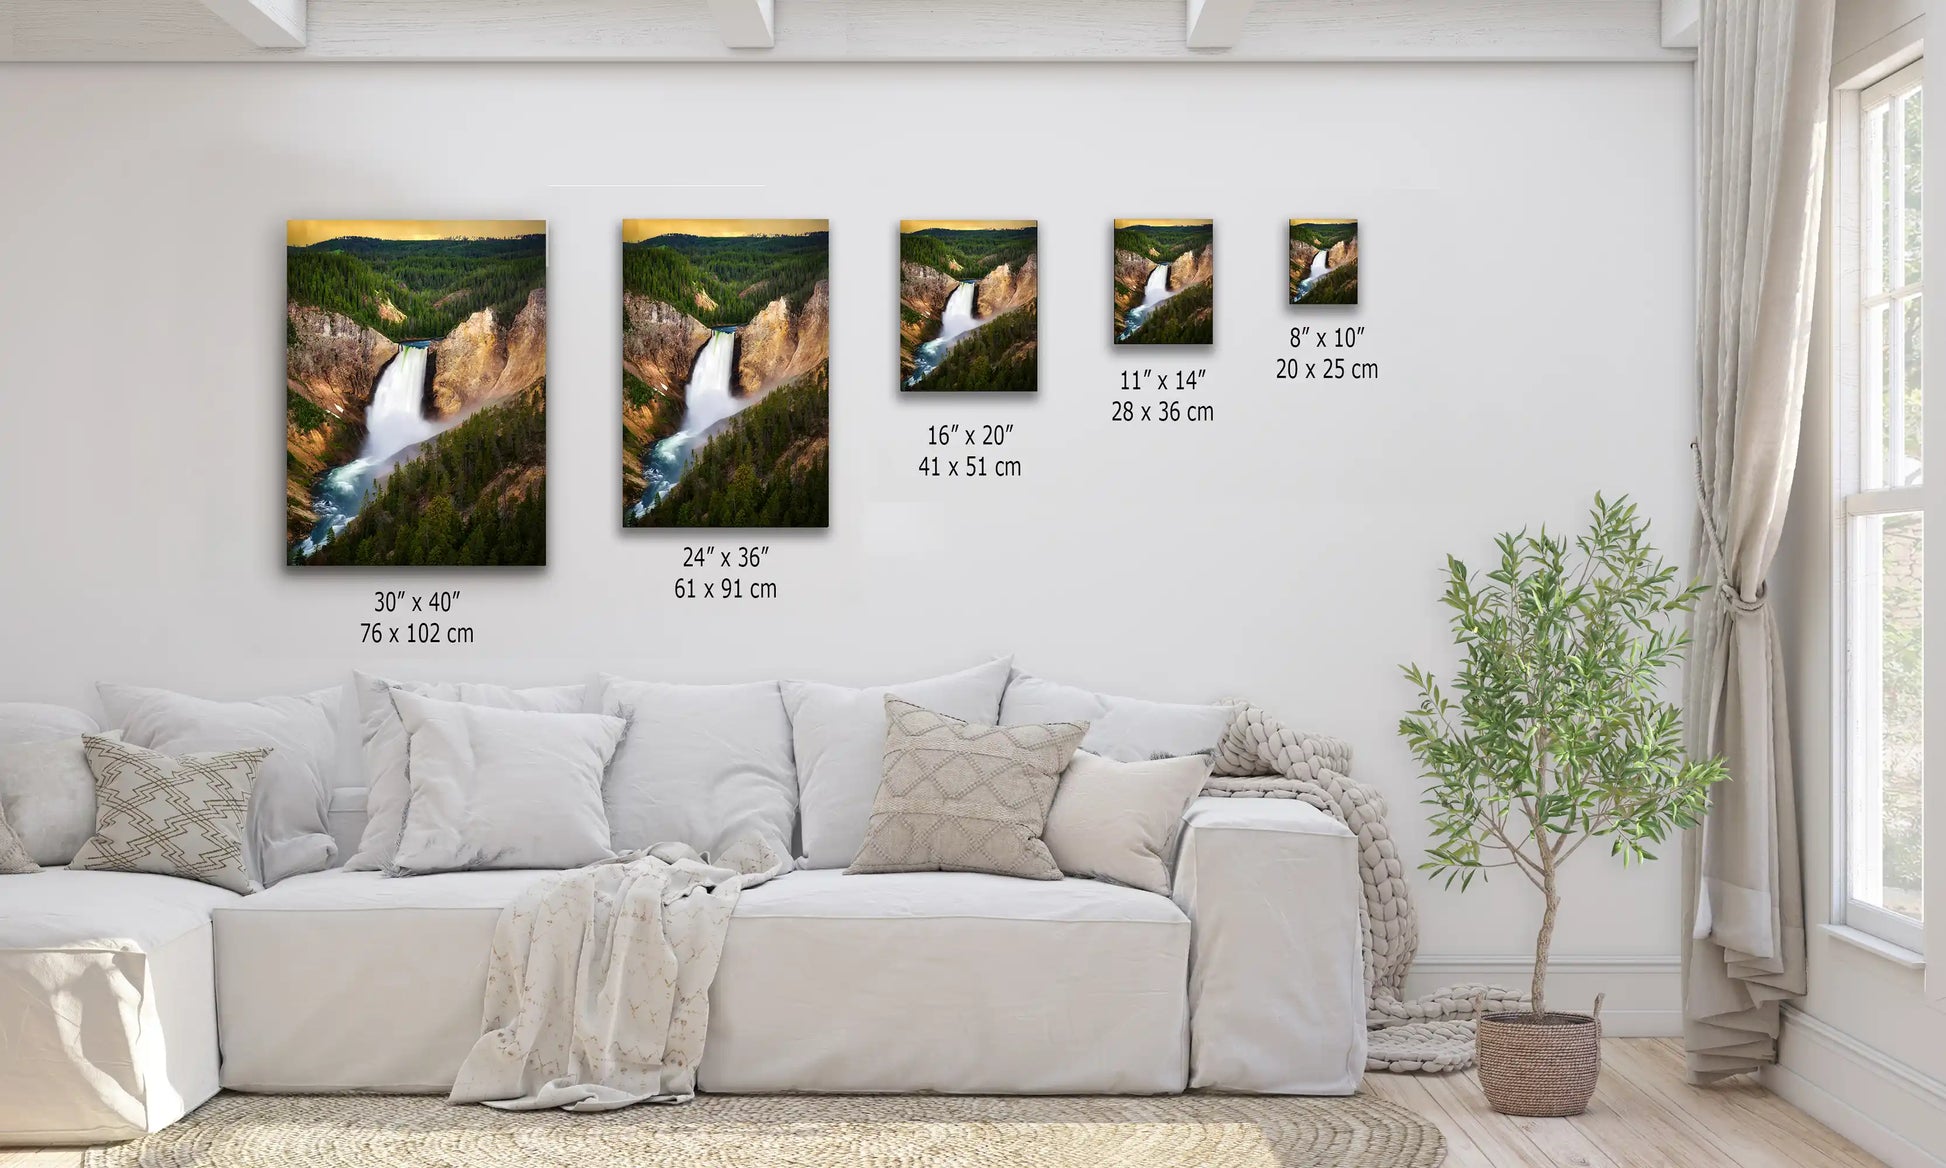 Size chart for wall art of Lower Yellowstone Falls at sunset, ranging from small to large prints, showcasing the art in a home setting.